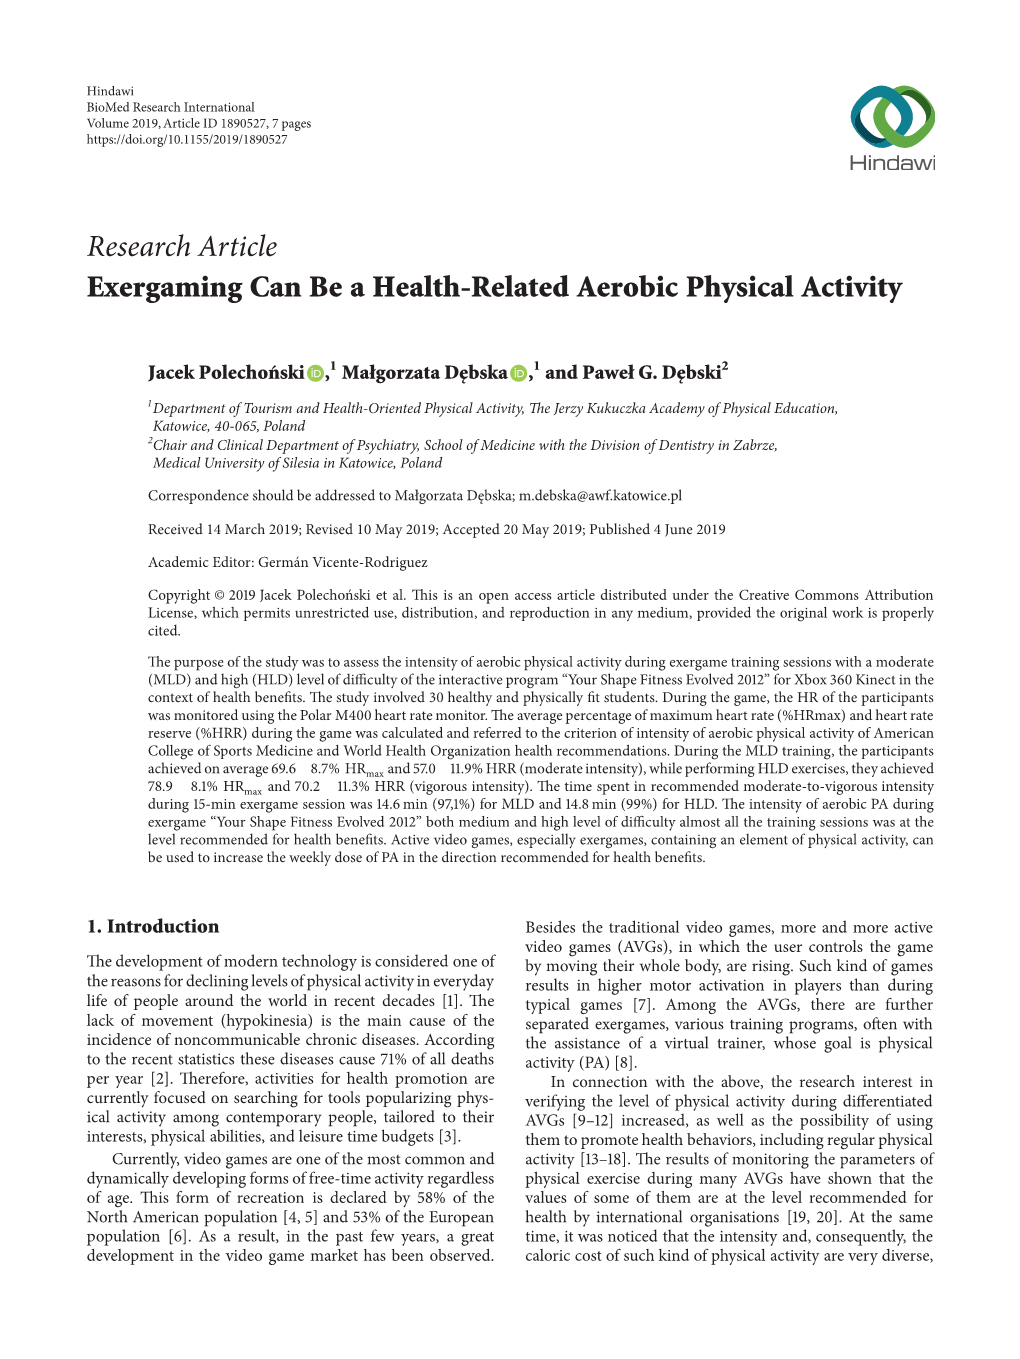 Research Article Exergaming Can Be a Health-Related Aerobic Physical Activity